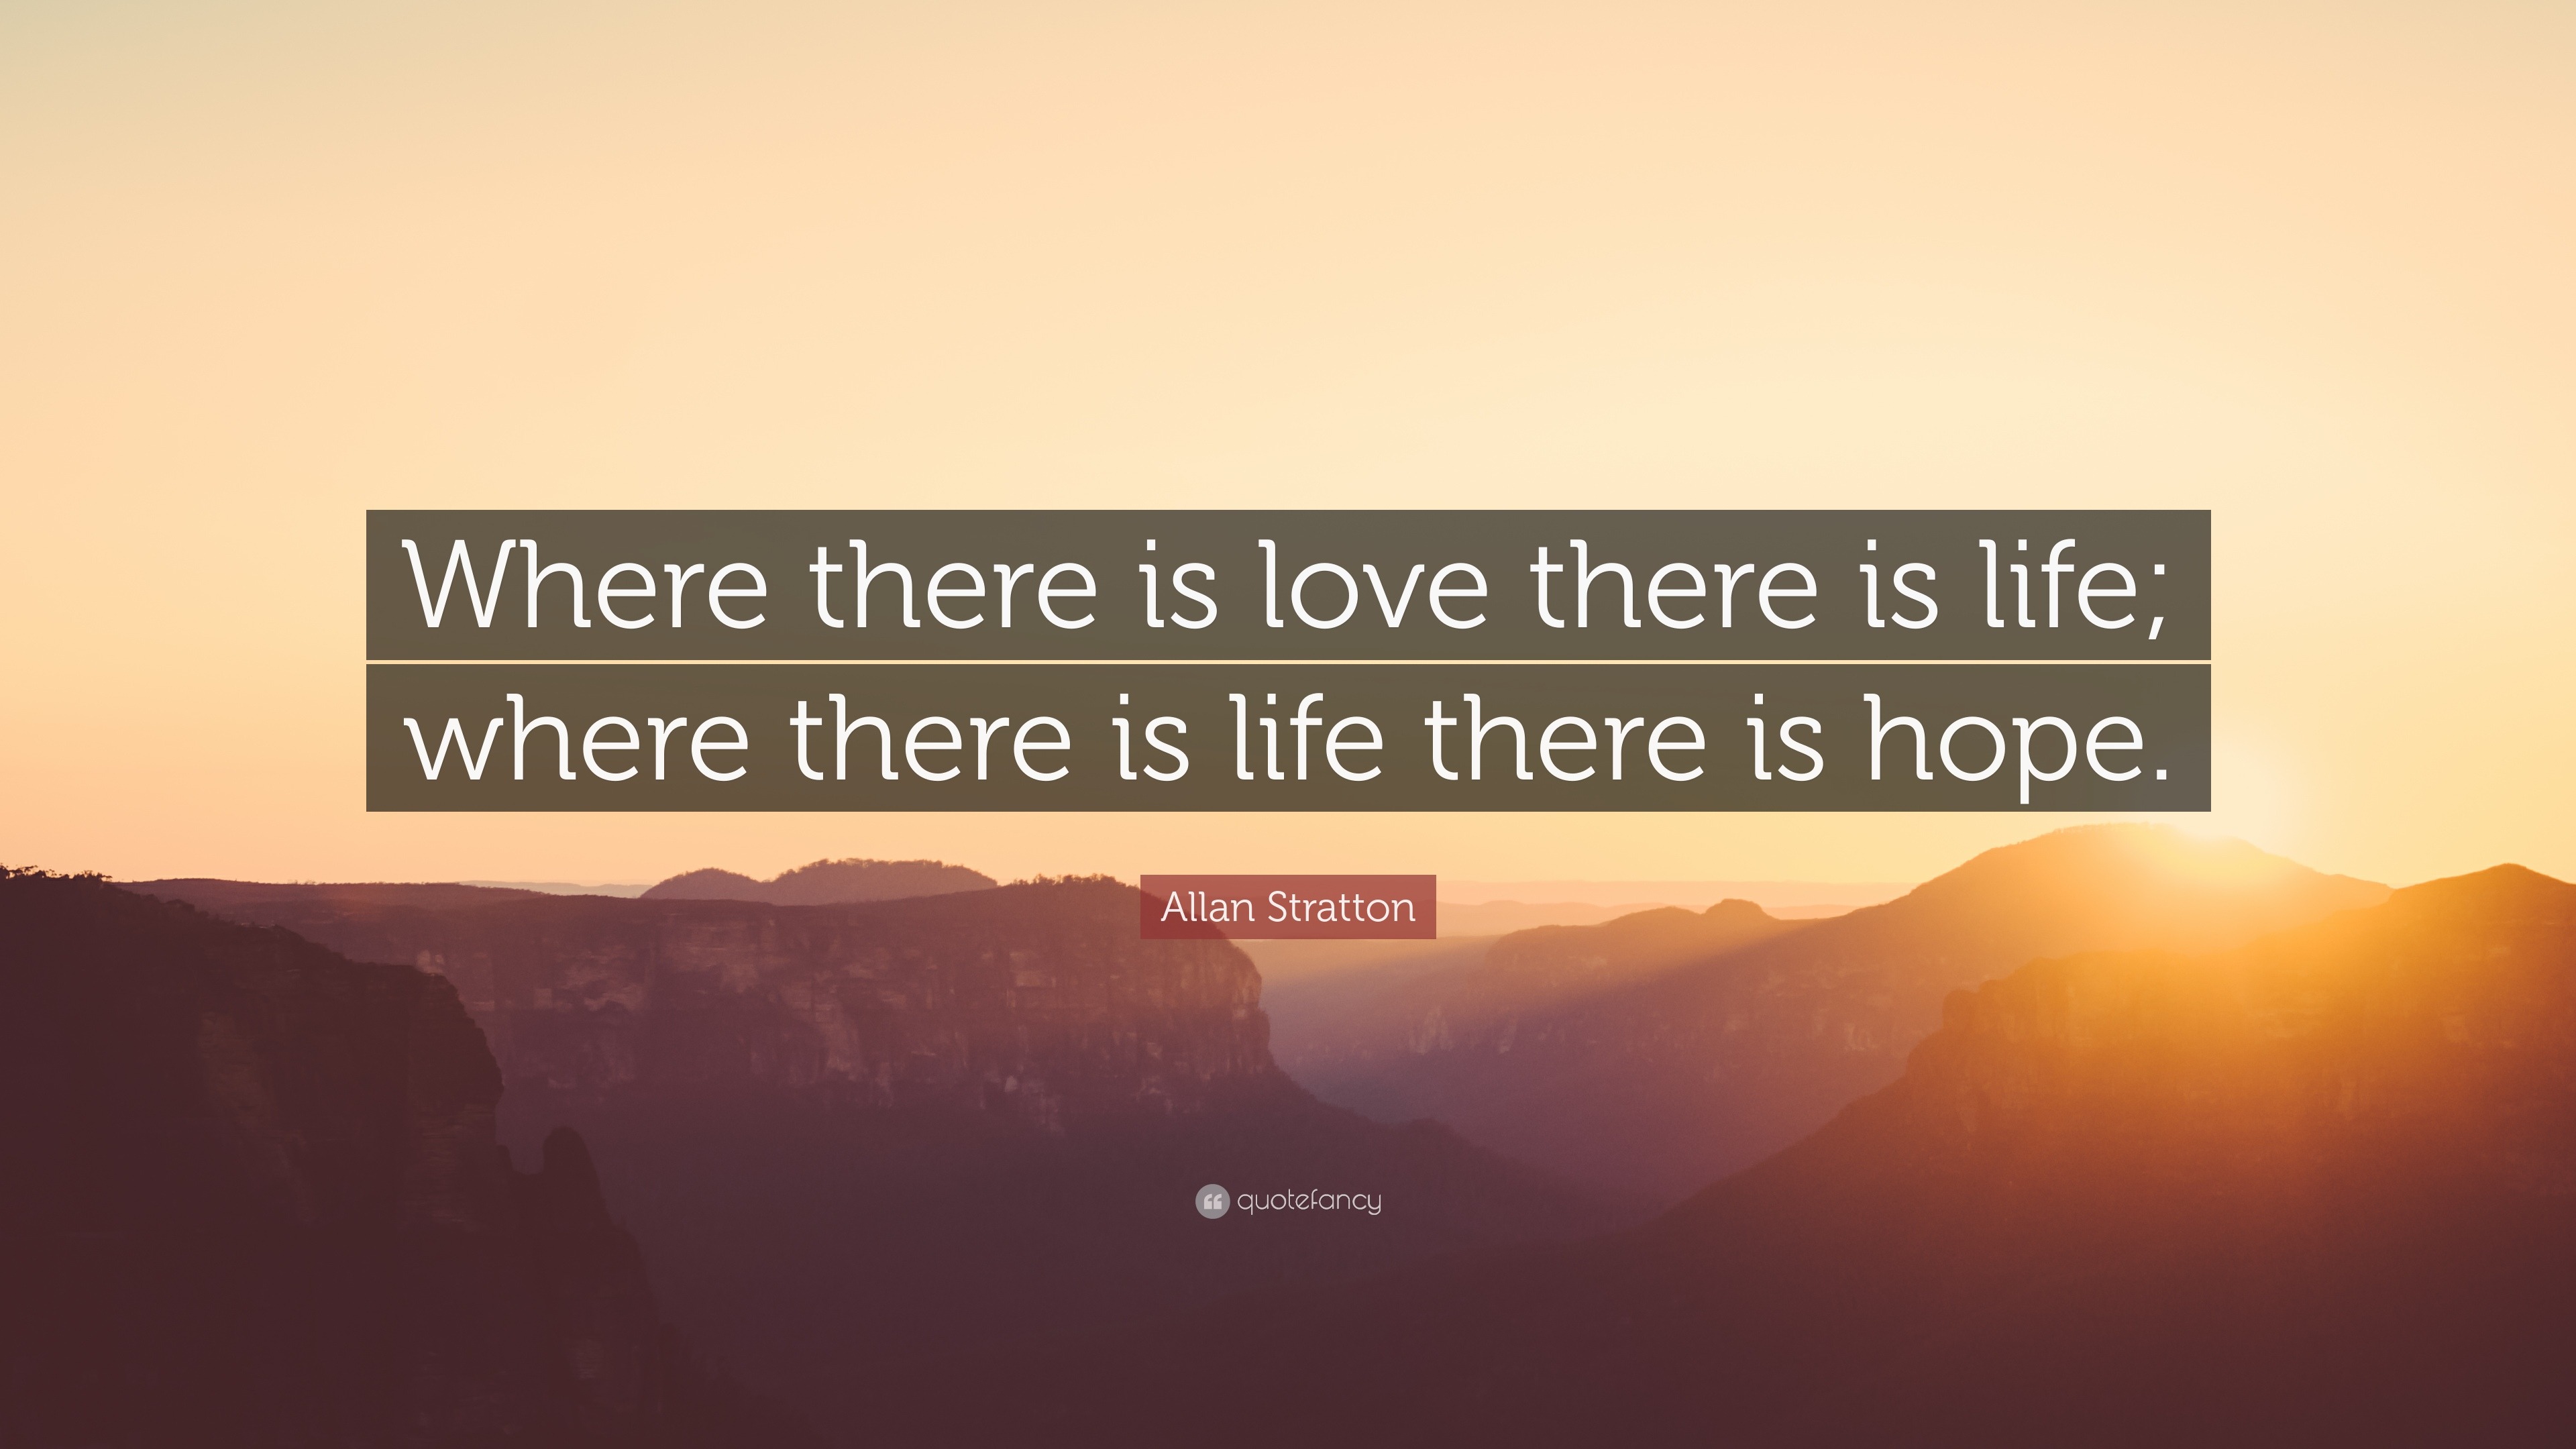 Allan Stratton Quote: “Where There Is Love There Is Life; Where There Is Life There Is